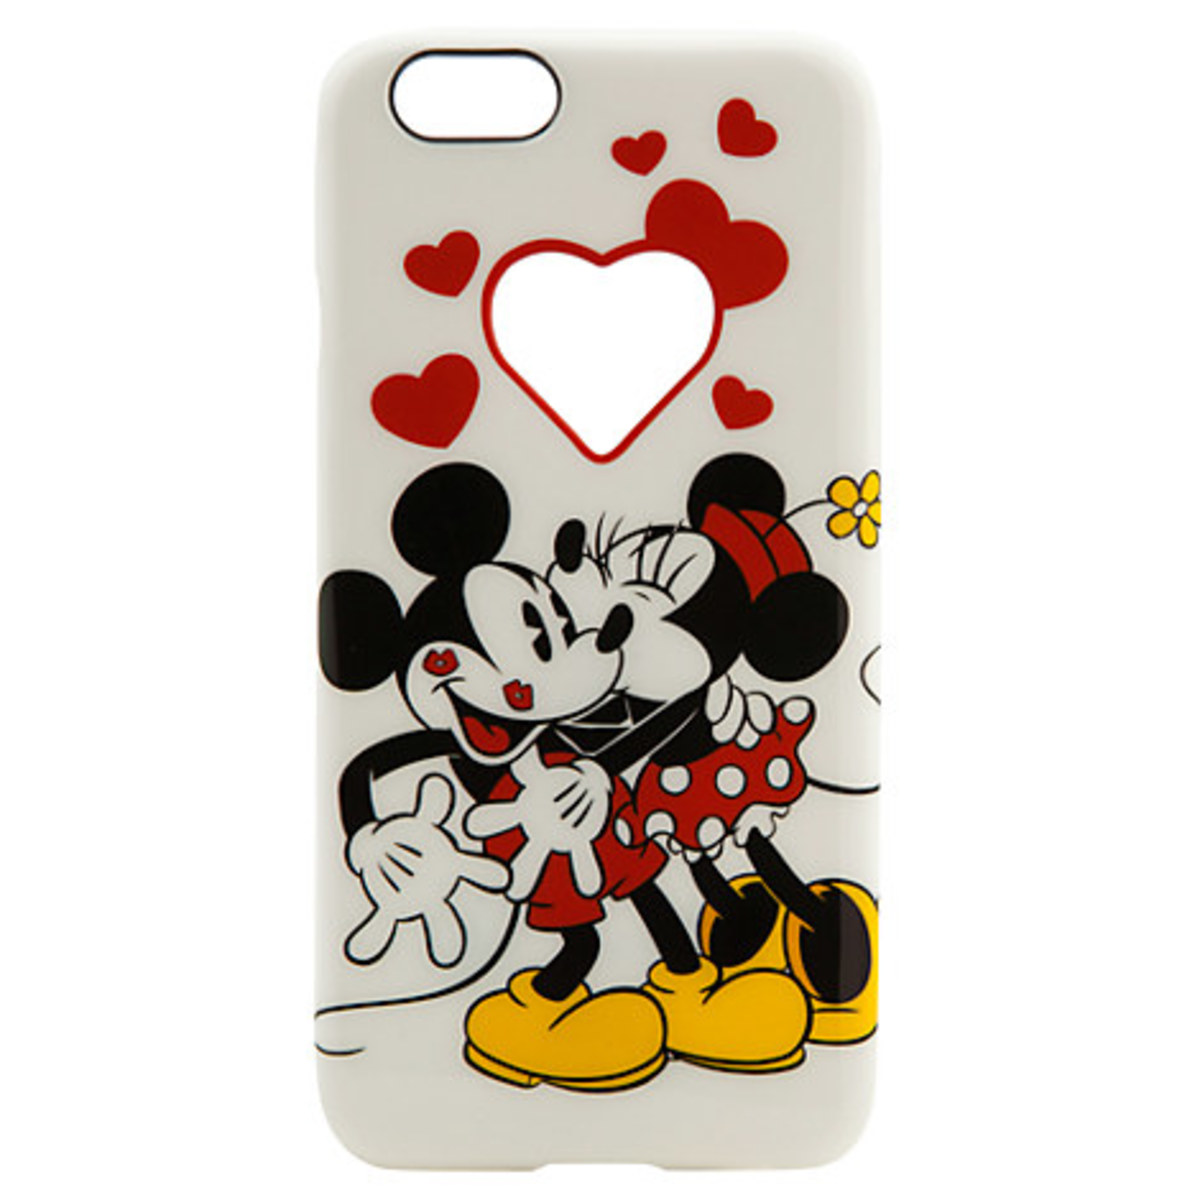 Jazz up your sweetie's phone with this Disney case. 